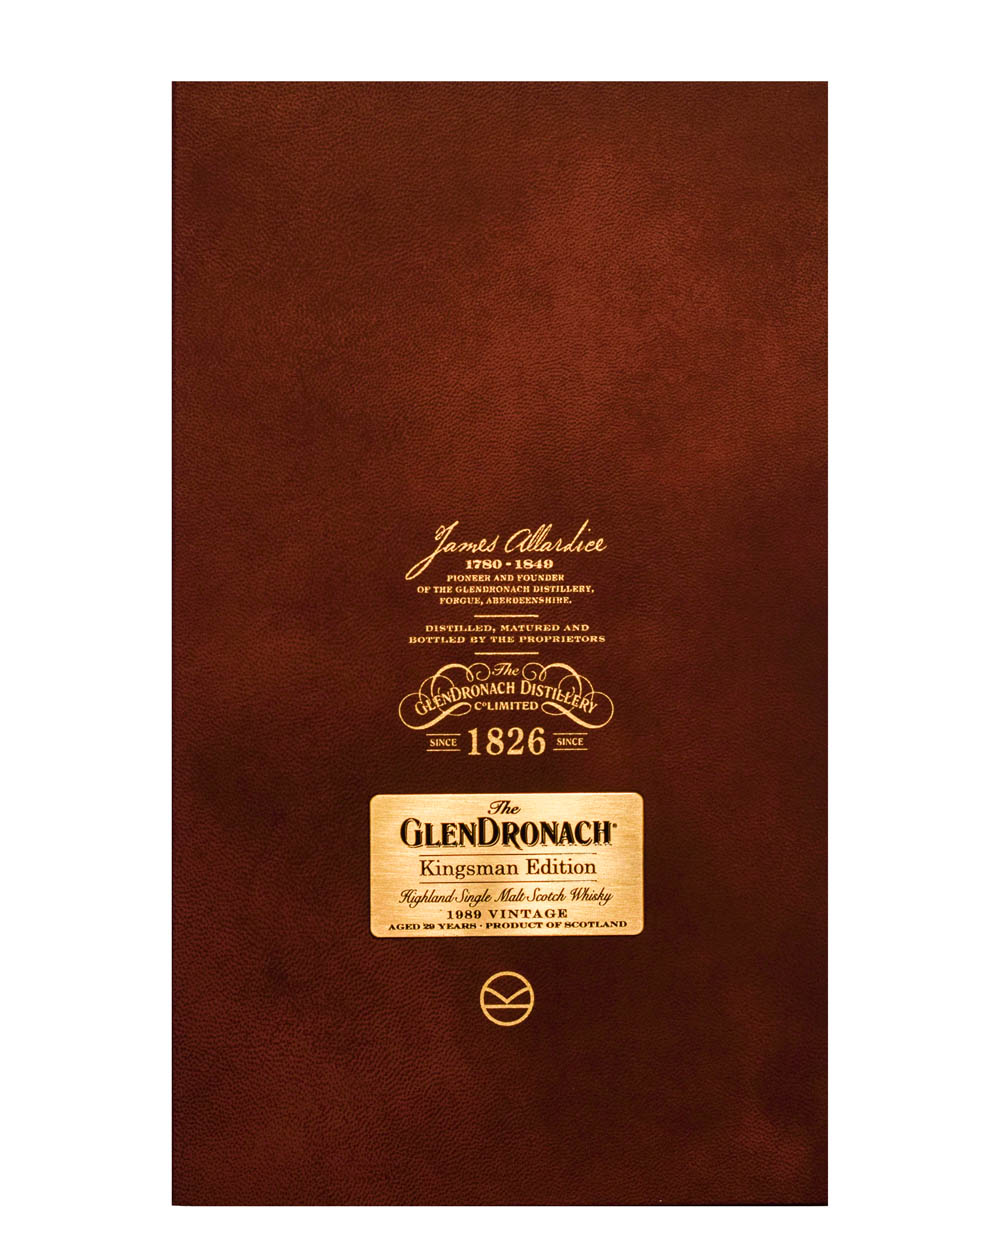 Glendronach 1989 Vintage Kingsman Edition (29 Years Old) Box 2 Musthave Malts MHM